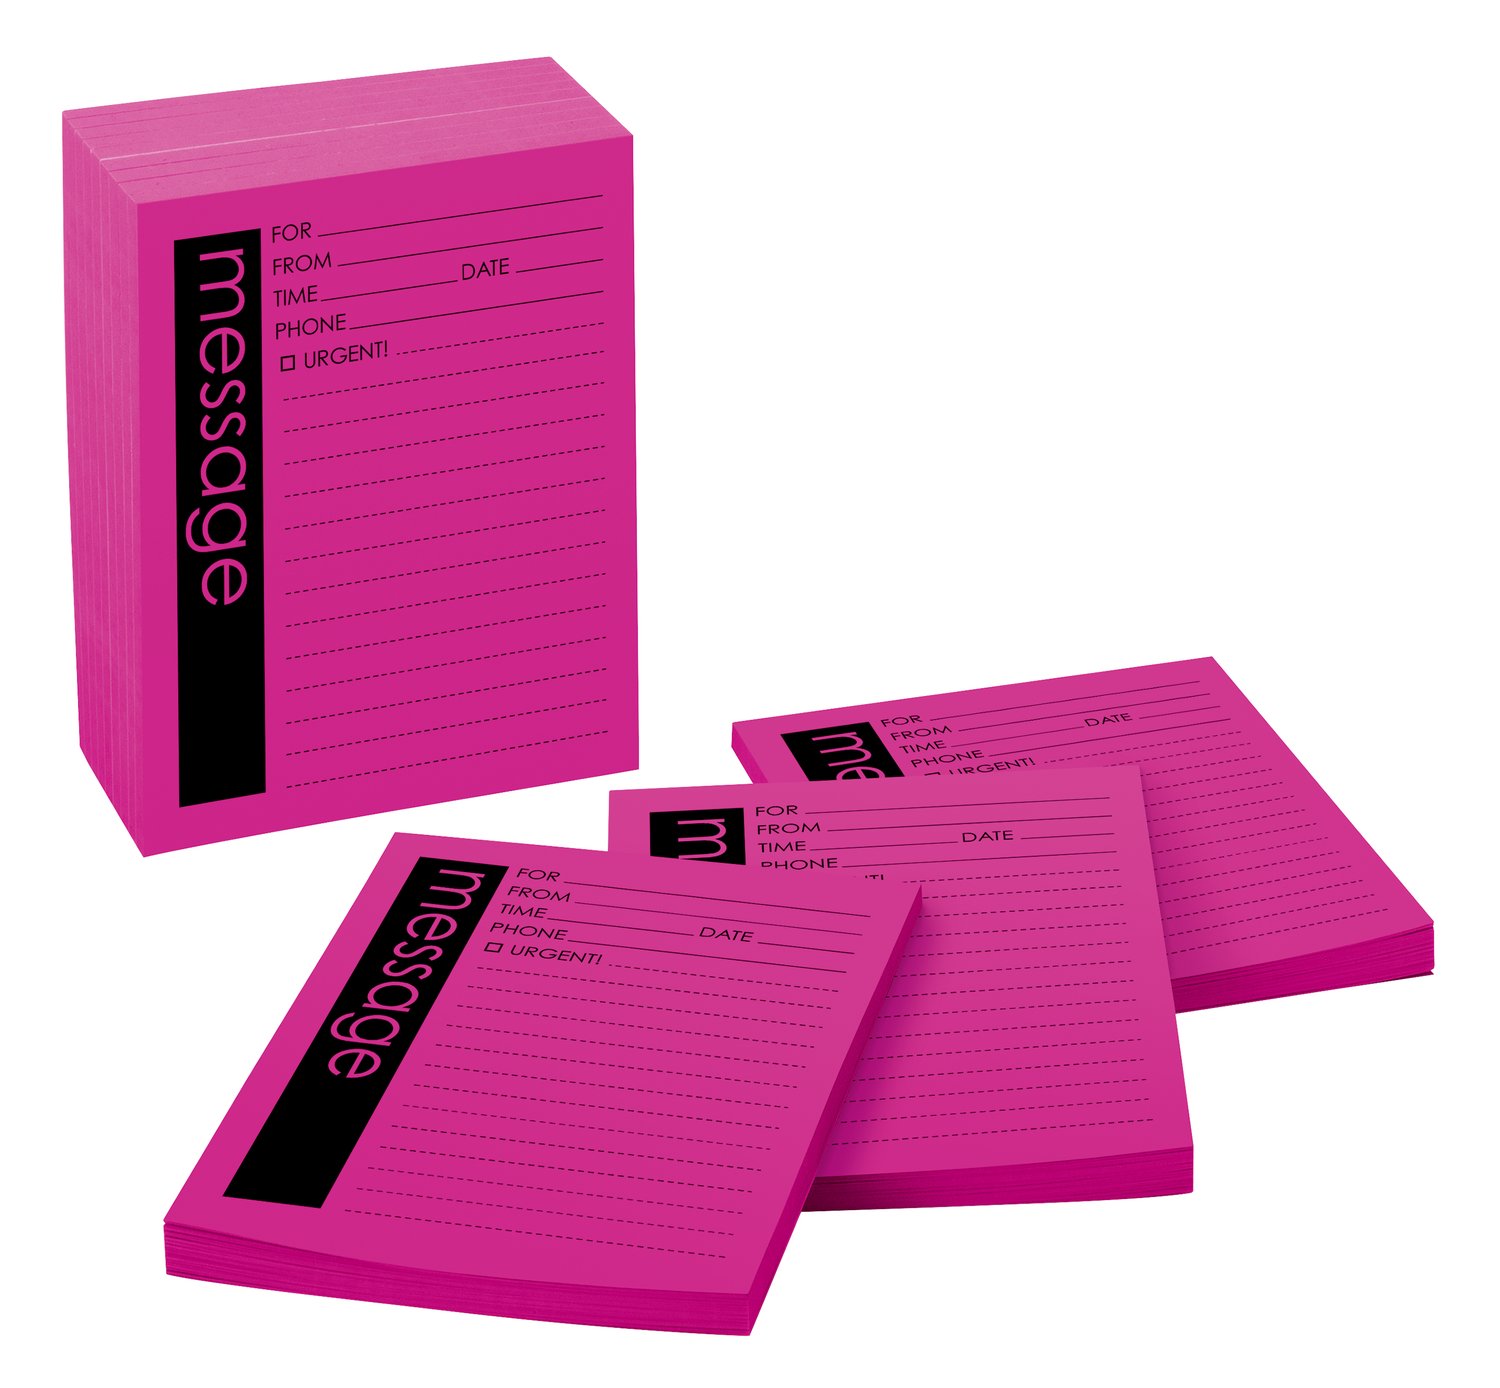 7010333445 - Post-it Super Sticky Printed Important Message Pads 7662-12-SS, 4 in x
5 in, Fireball Fuchsia, Lined, 12 Pads/Pack, 50 sheets/Pad